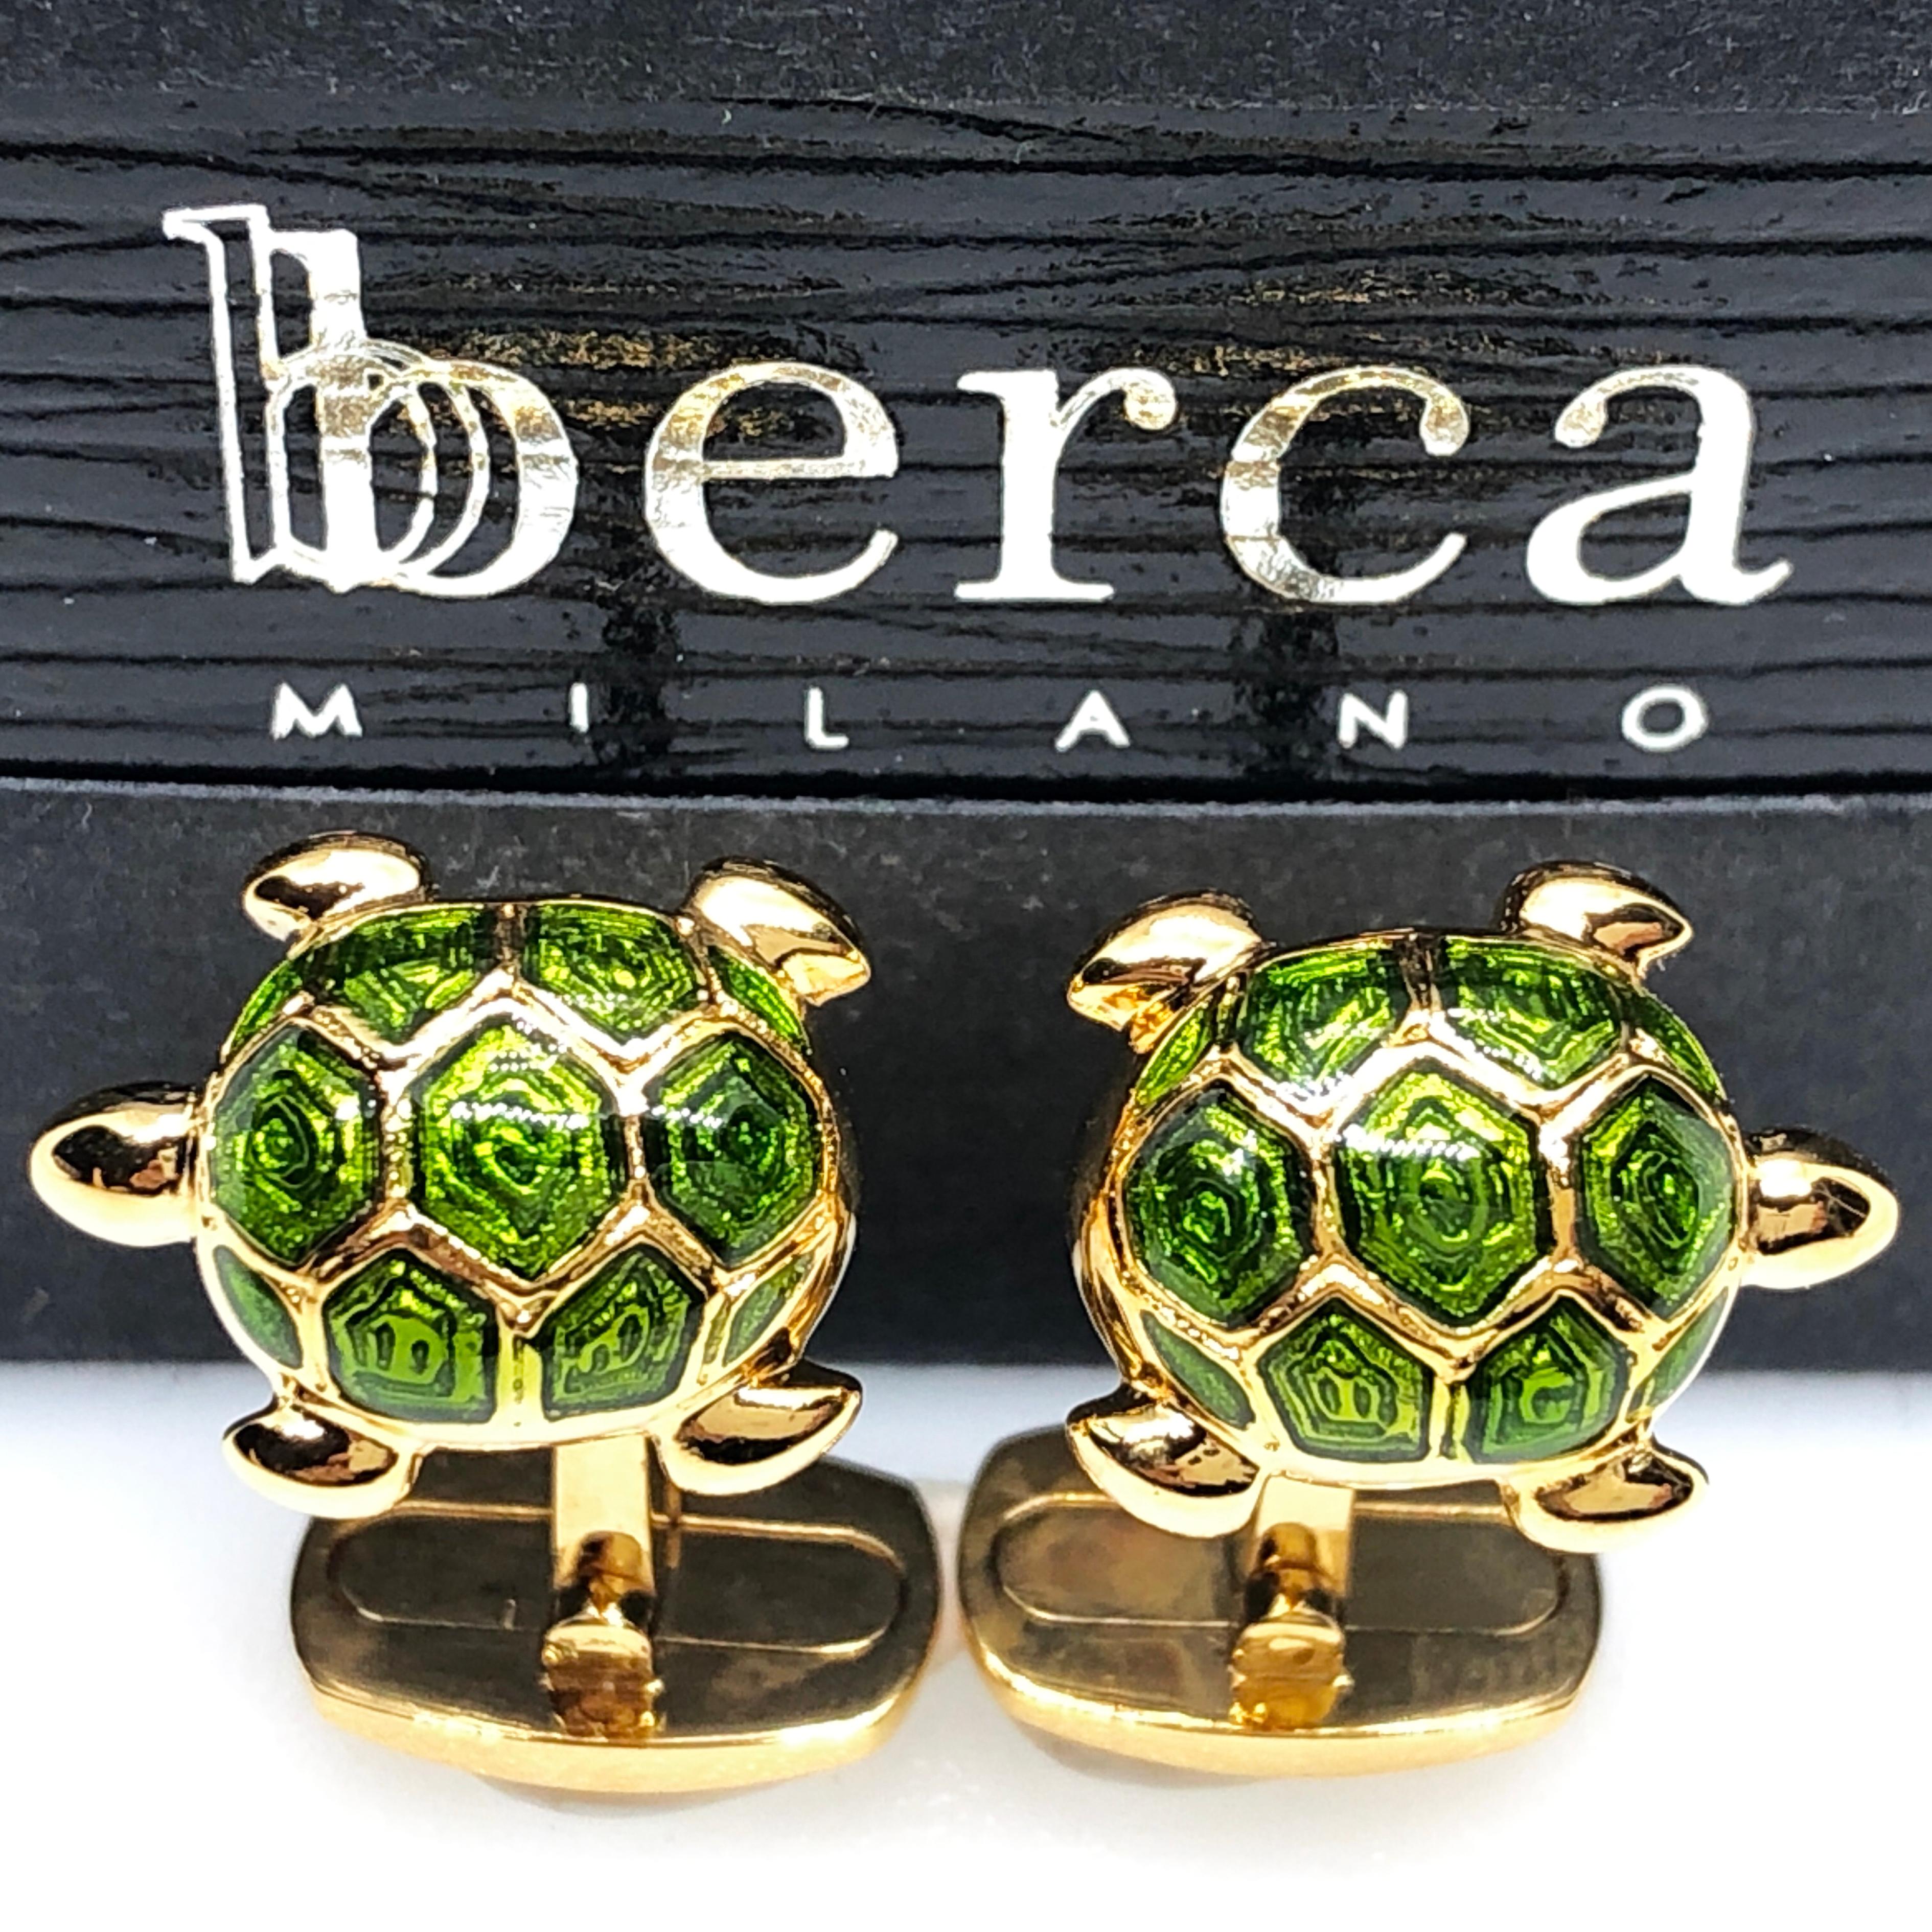 Unique and Chic Light Green Hand Enamelled Little Turtle Shaped T-Bar Back, Sterling Silver Yellow Gold Plated Cufflinks.
In our smart black box and pouch.
